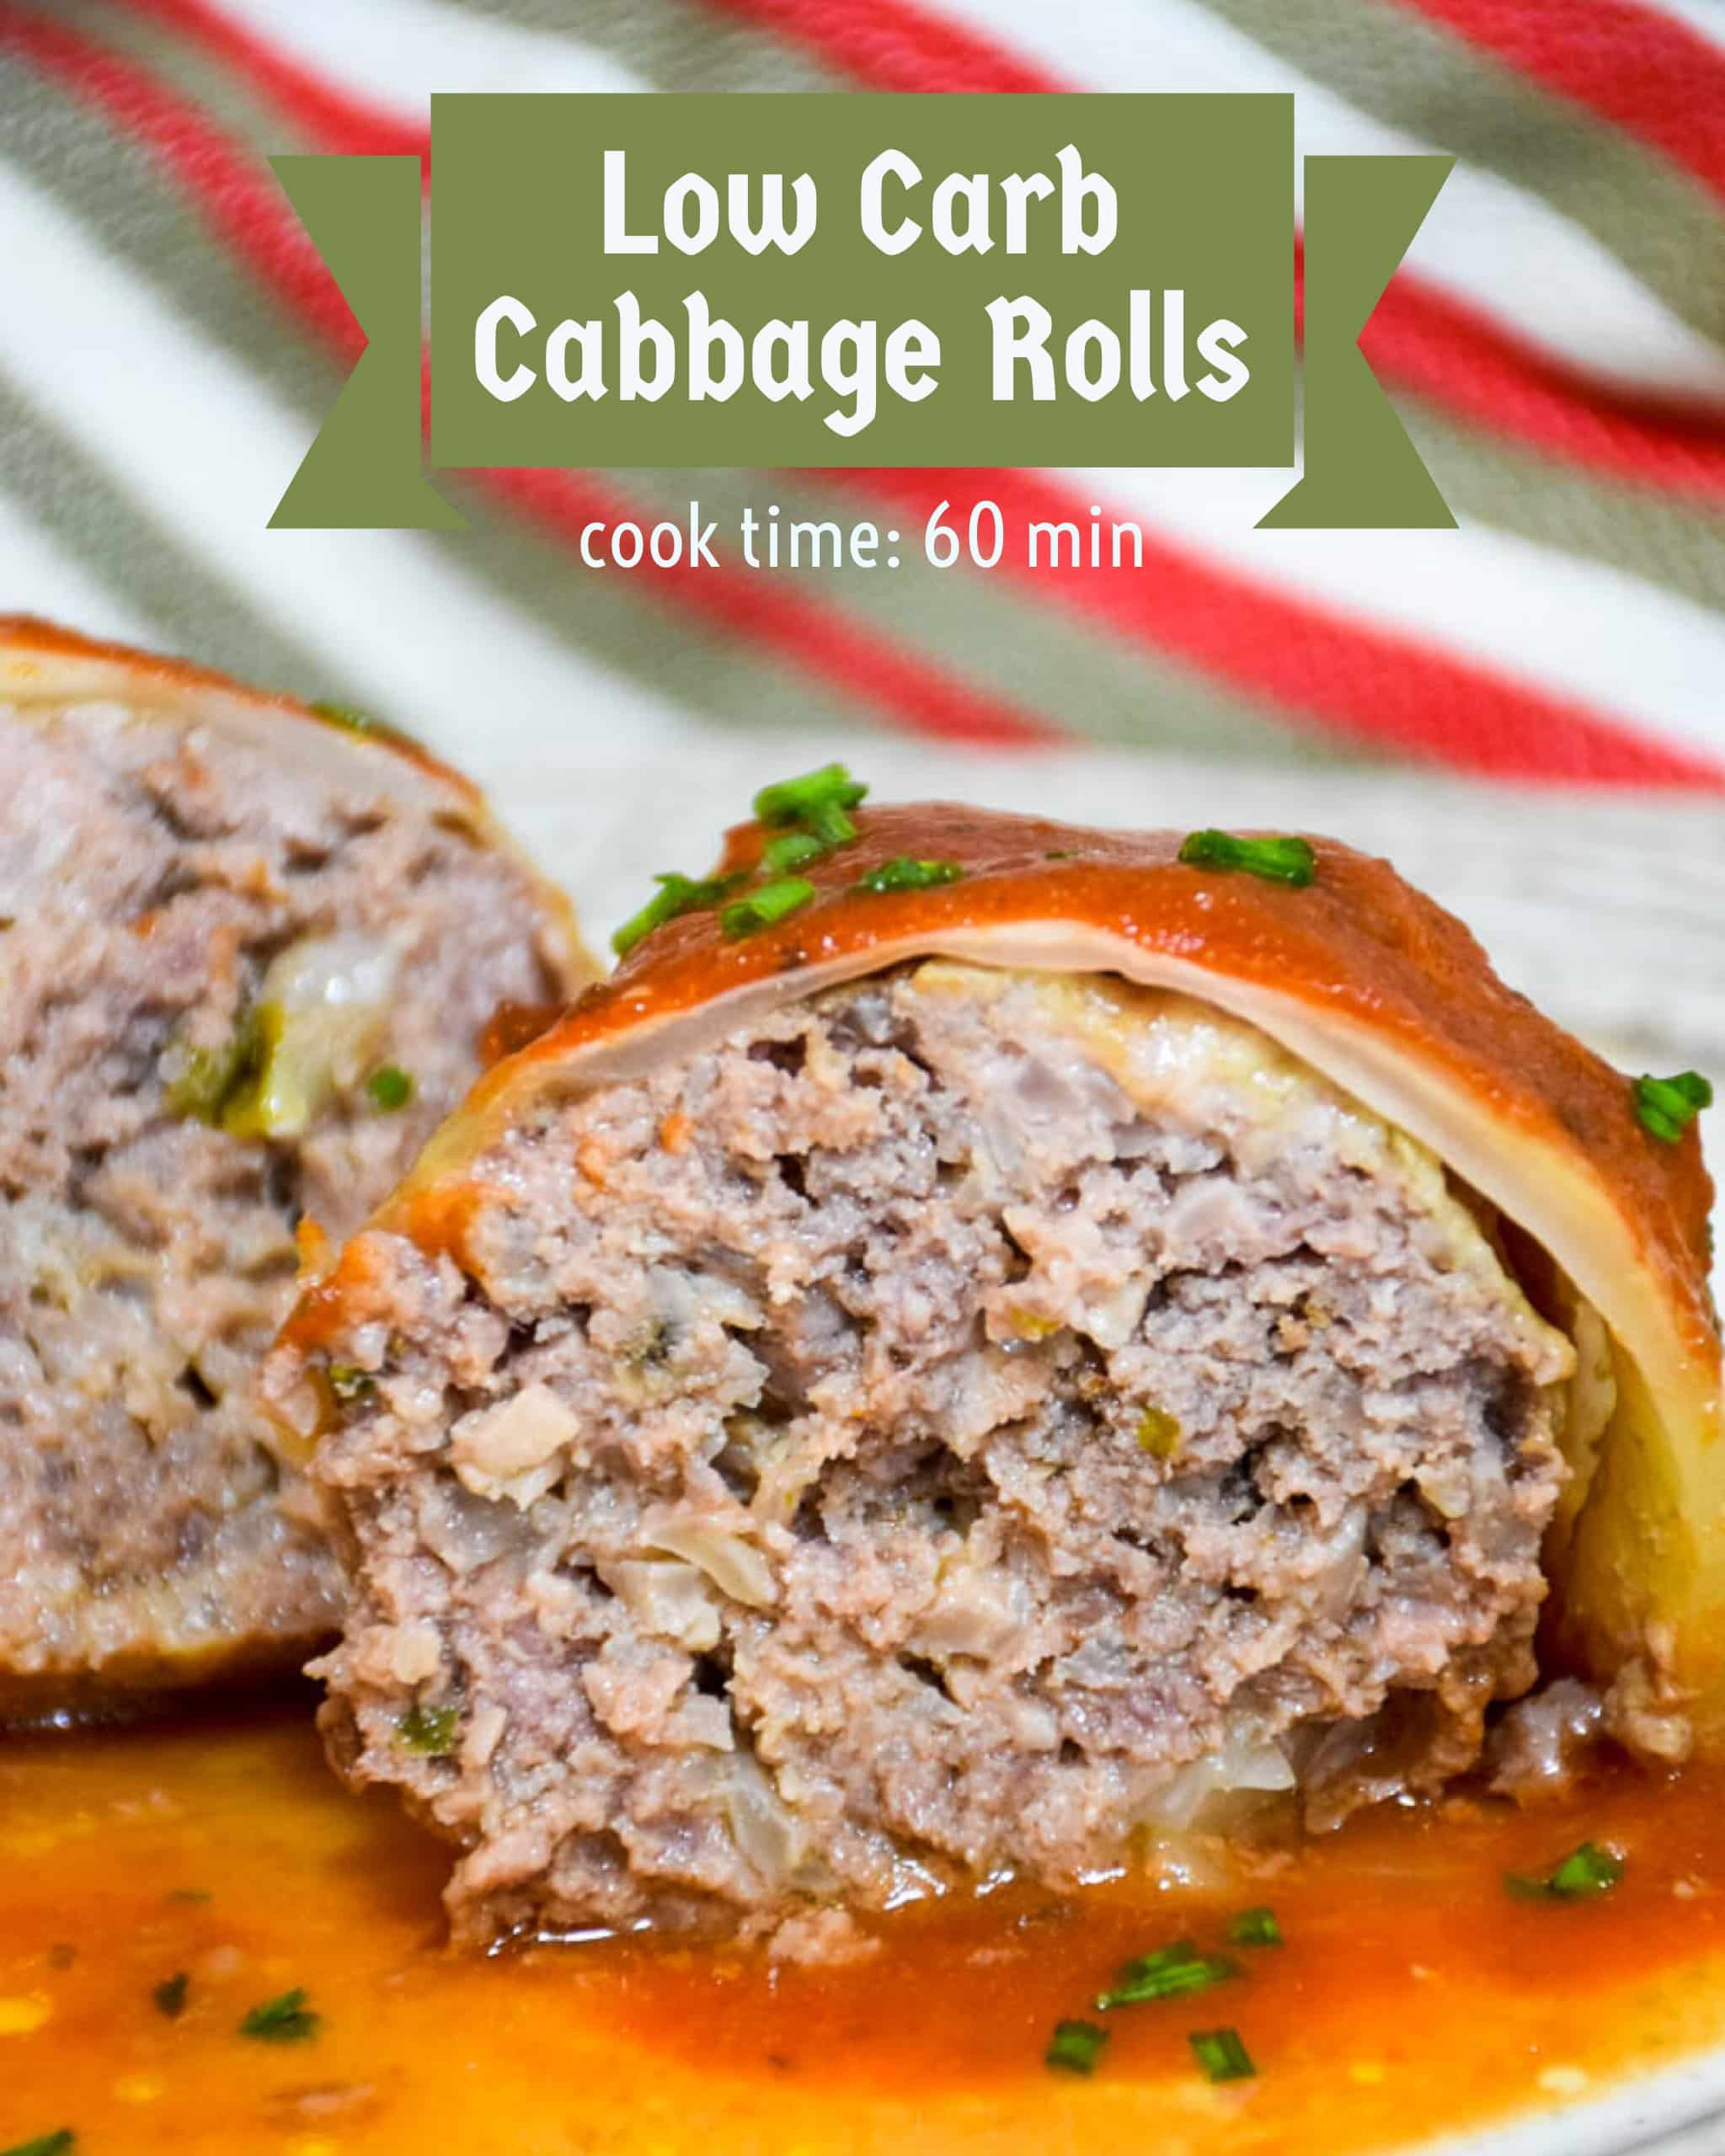 Low Carb Cabbage Rolls New Cabbage Rolls Low Carb Keto Recipe Grumpy S Honeybunch